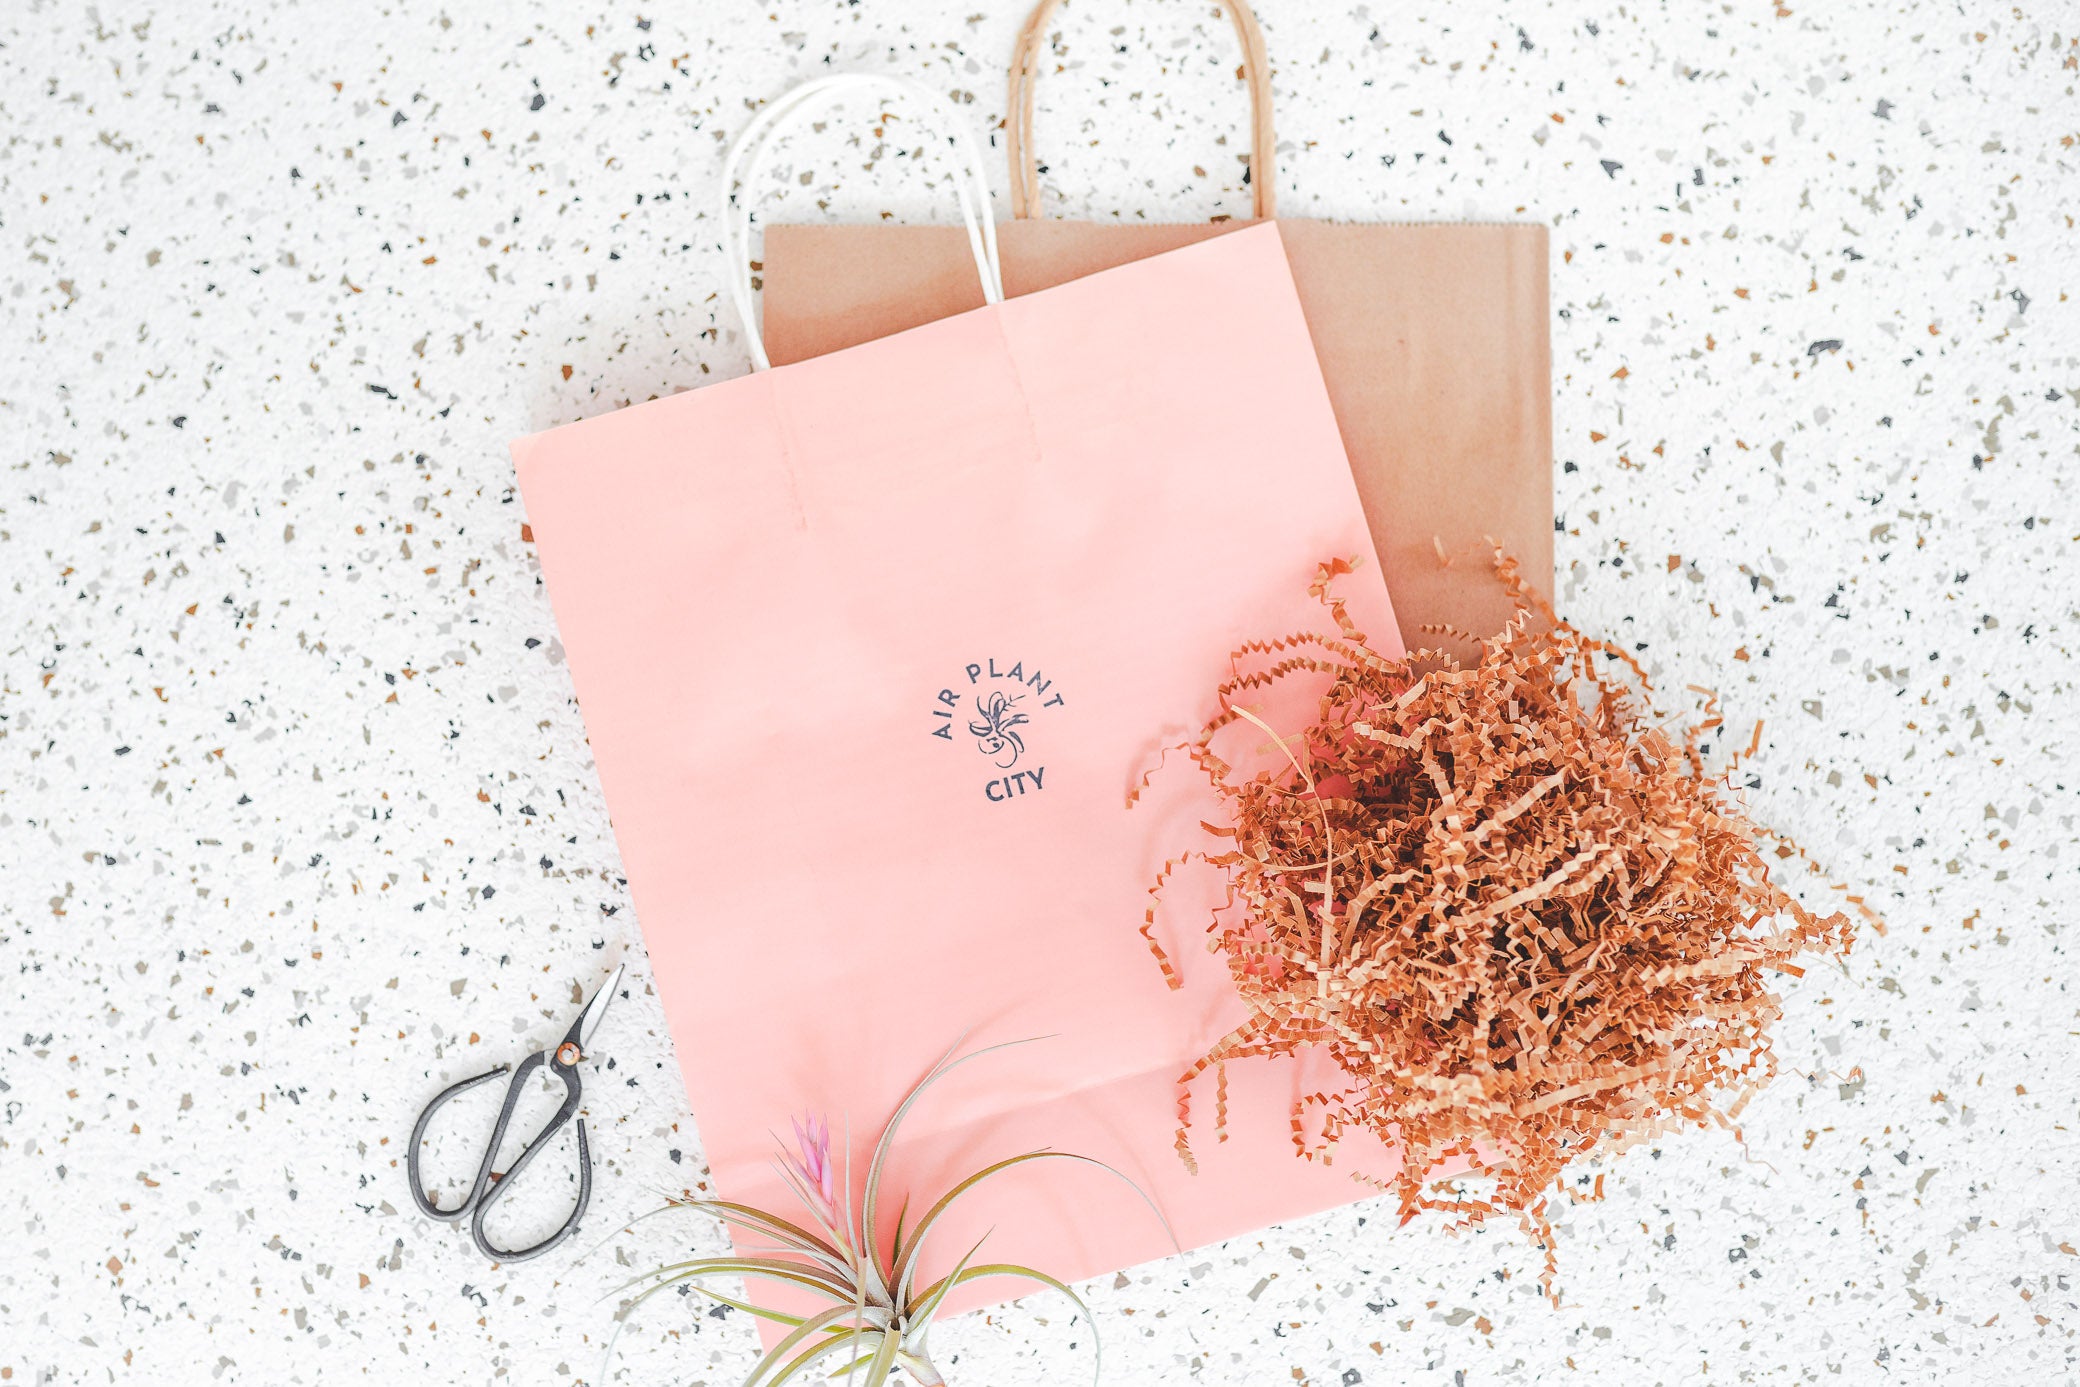 Air Plant Gift Wrapping for Tillandsia – Air Plant City